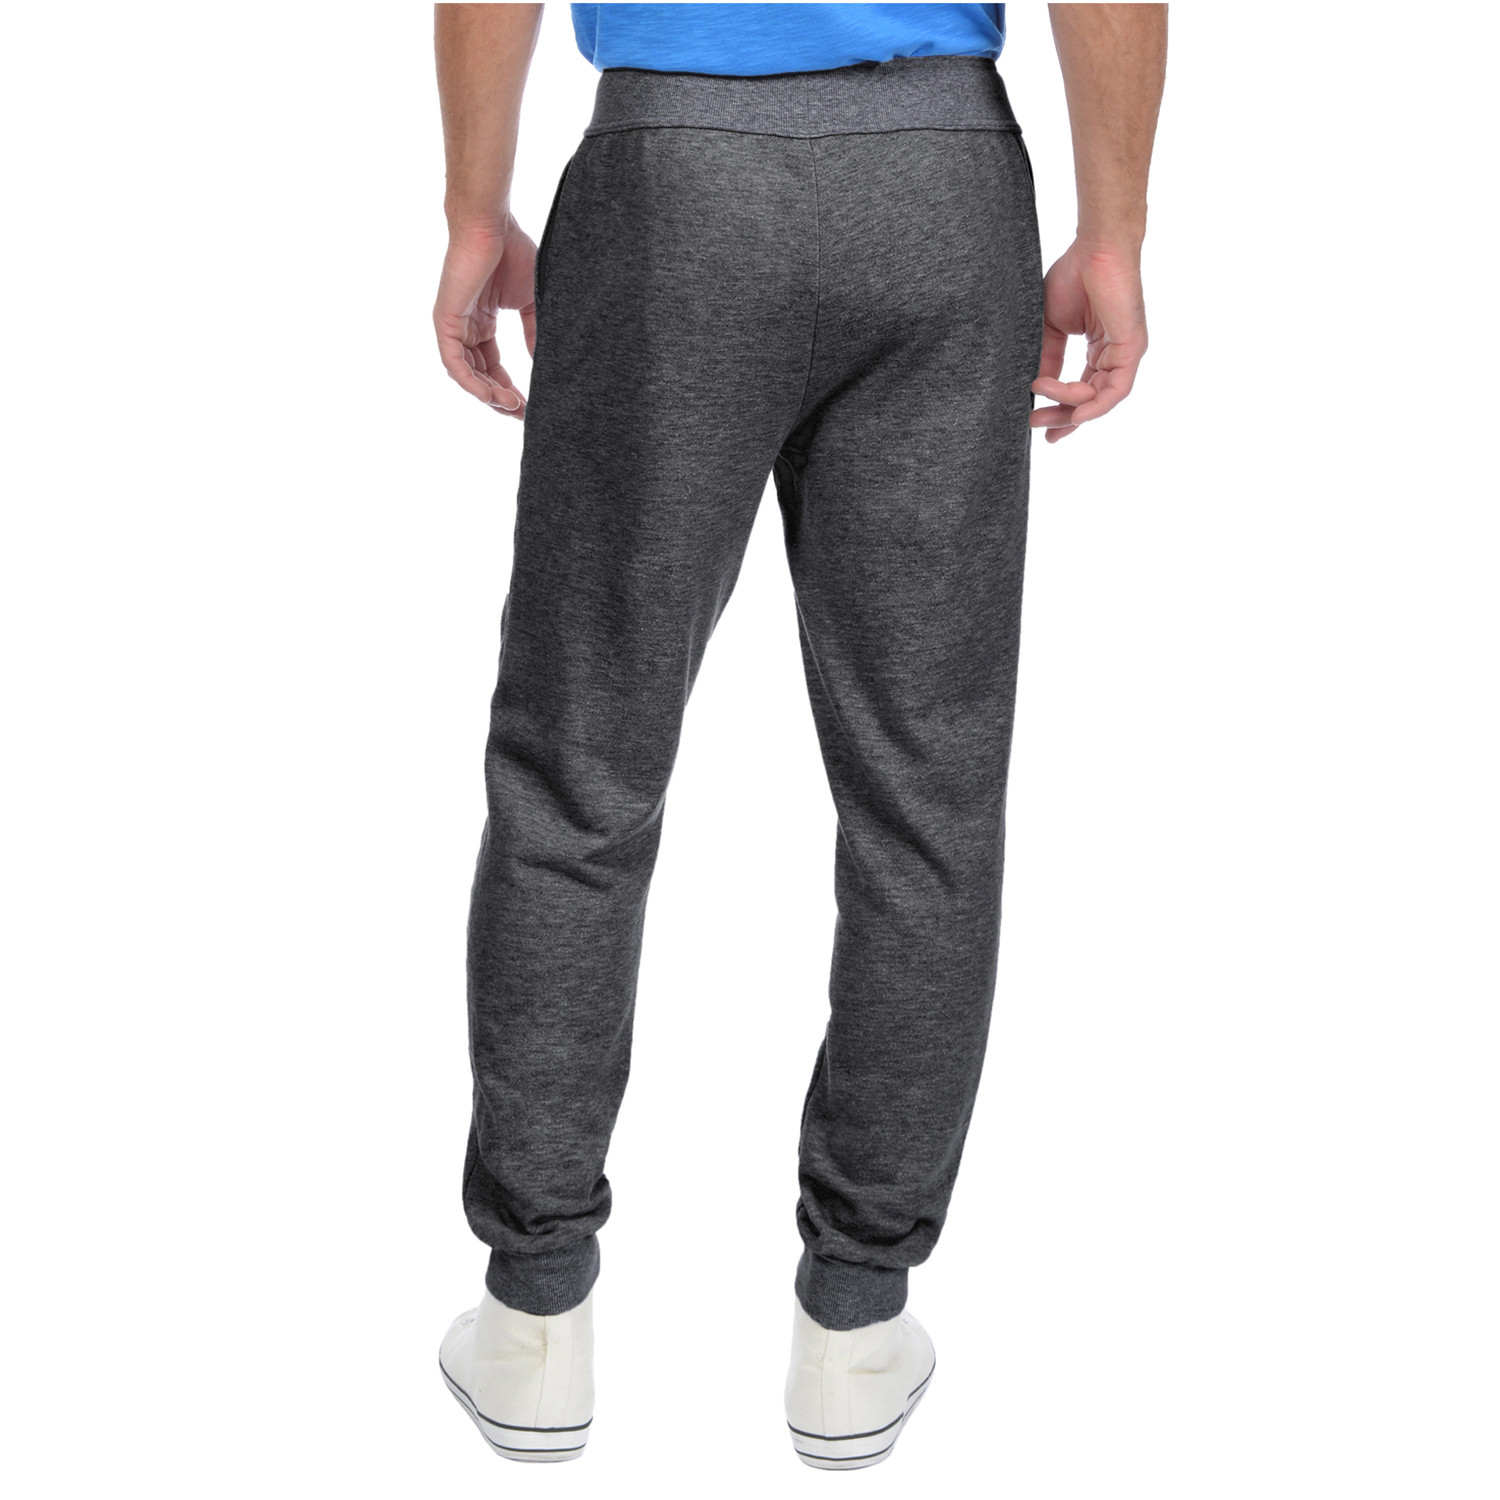 French Terry Jogger Sweatpants // Light Grey Heather (S) - 2(x)ist ...